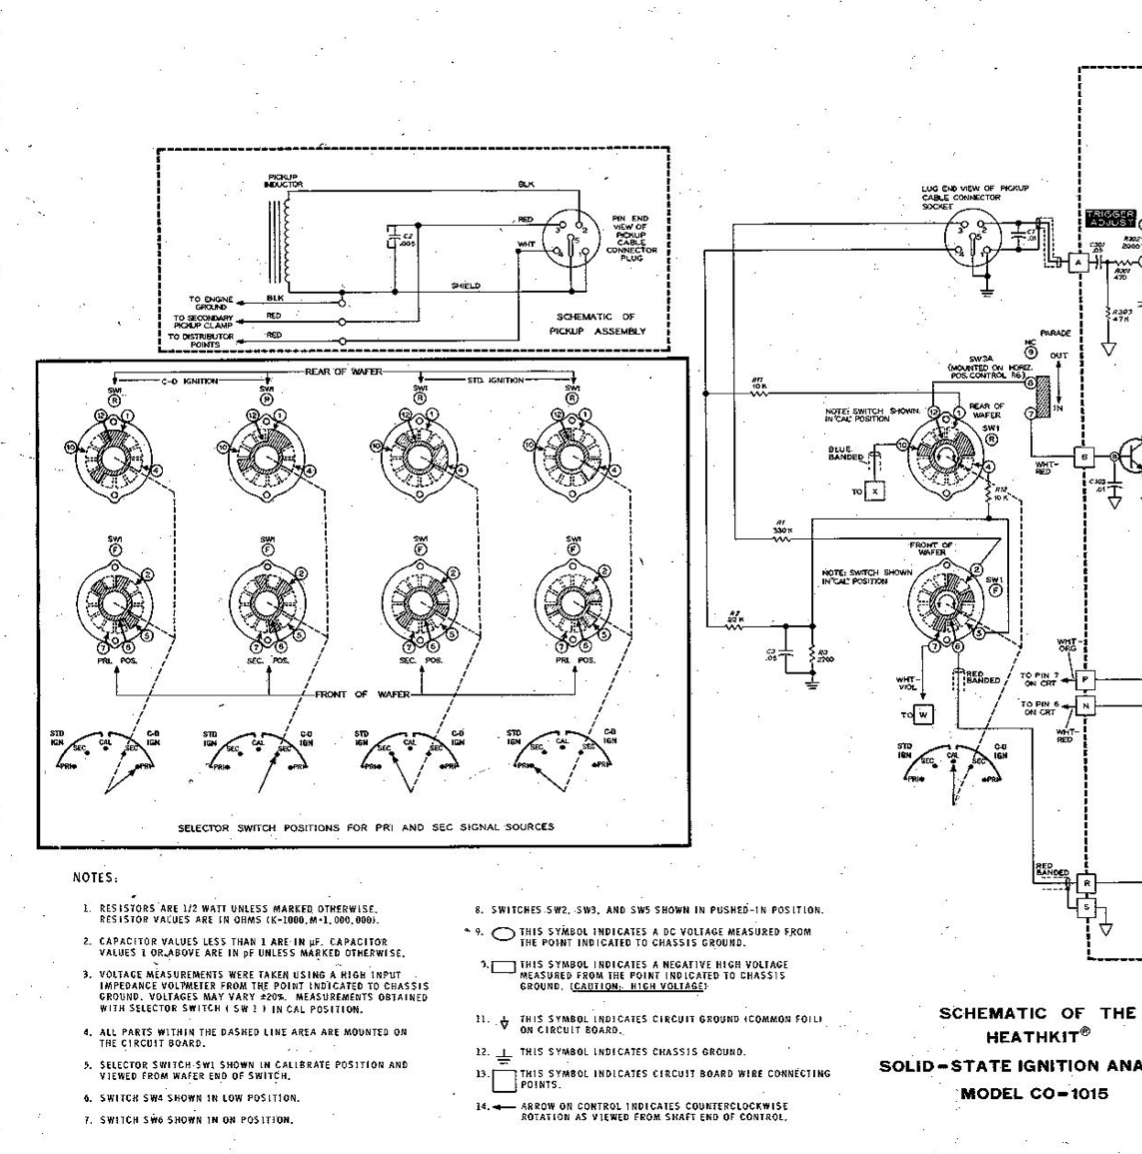 Heathkit CO-1015 Solid State Ignition Analyser - Schematic Diagrams